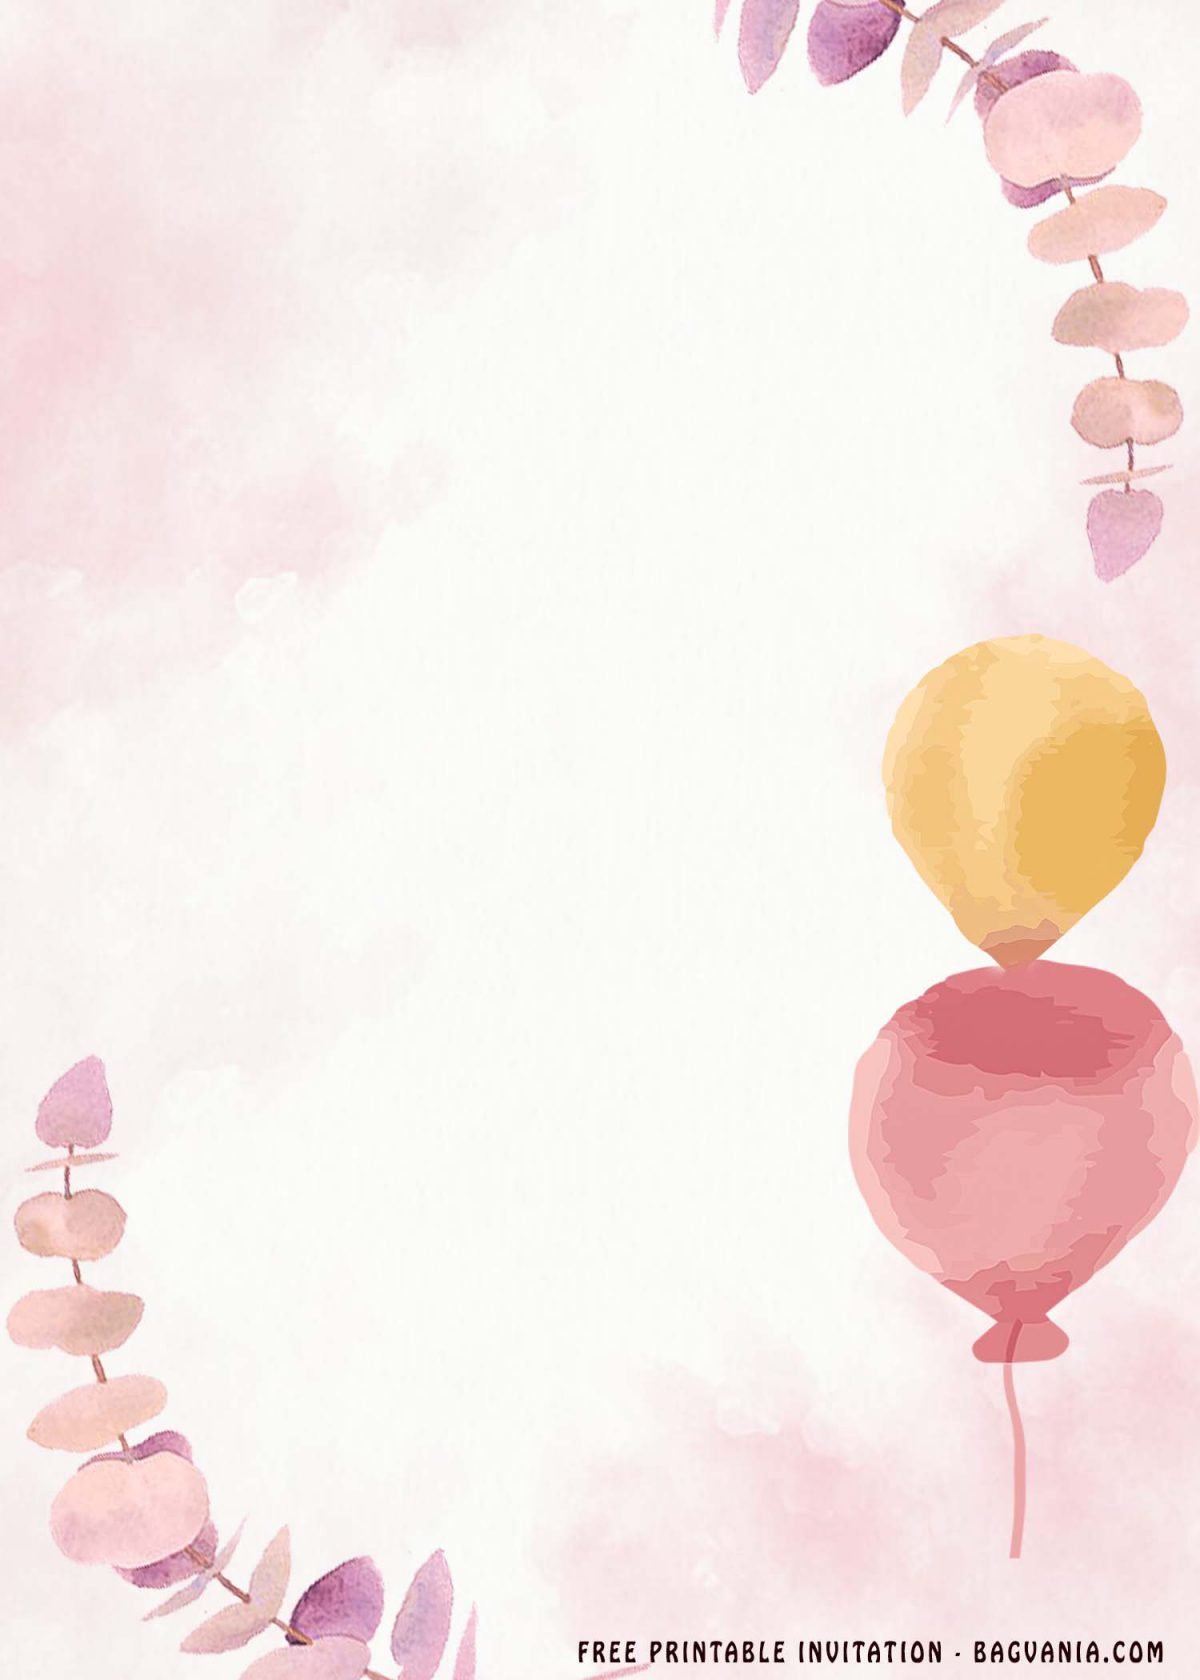 Free Printable Floral Pink Balloons Invitation Templates With Eucalyptus Flower